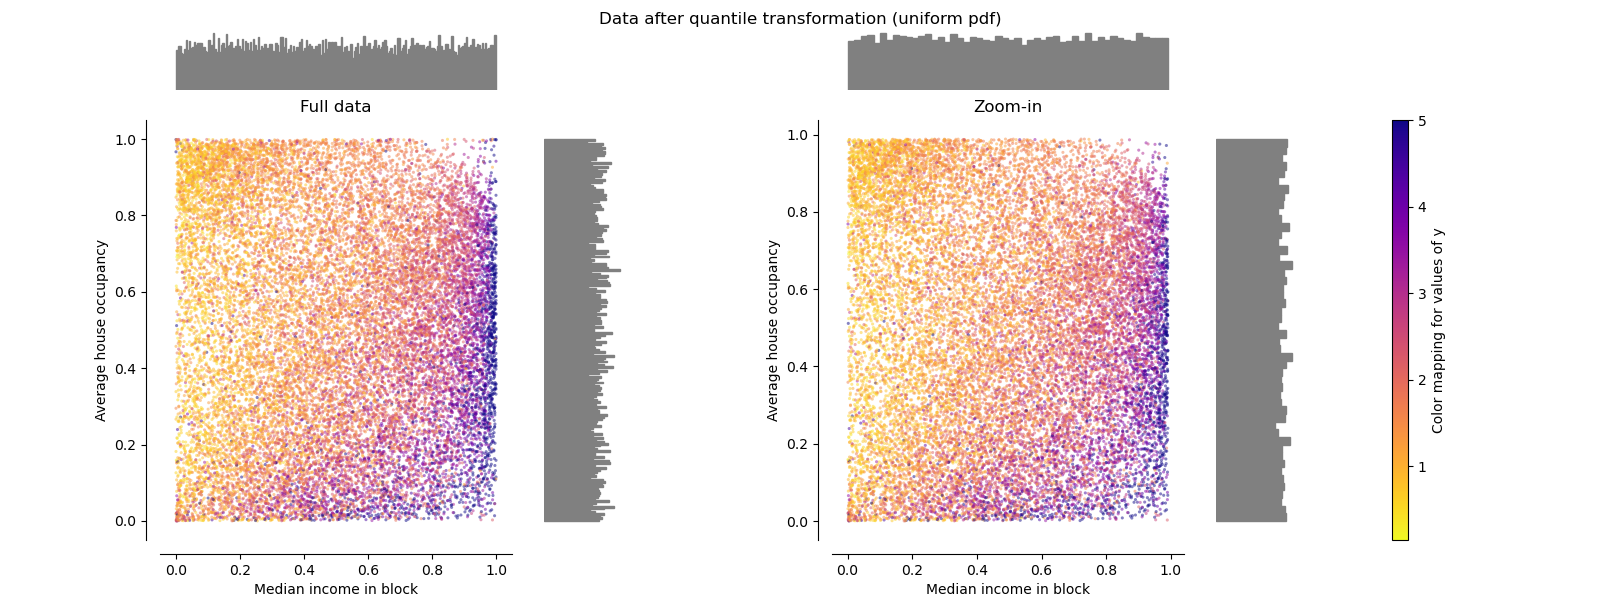 Data after quantile transformation (uniform pdf), Full data, Zoom-in